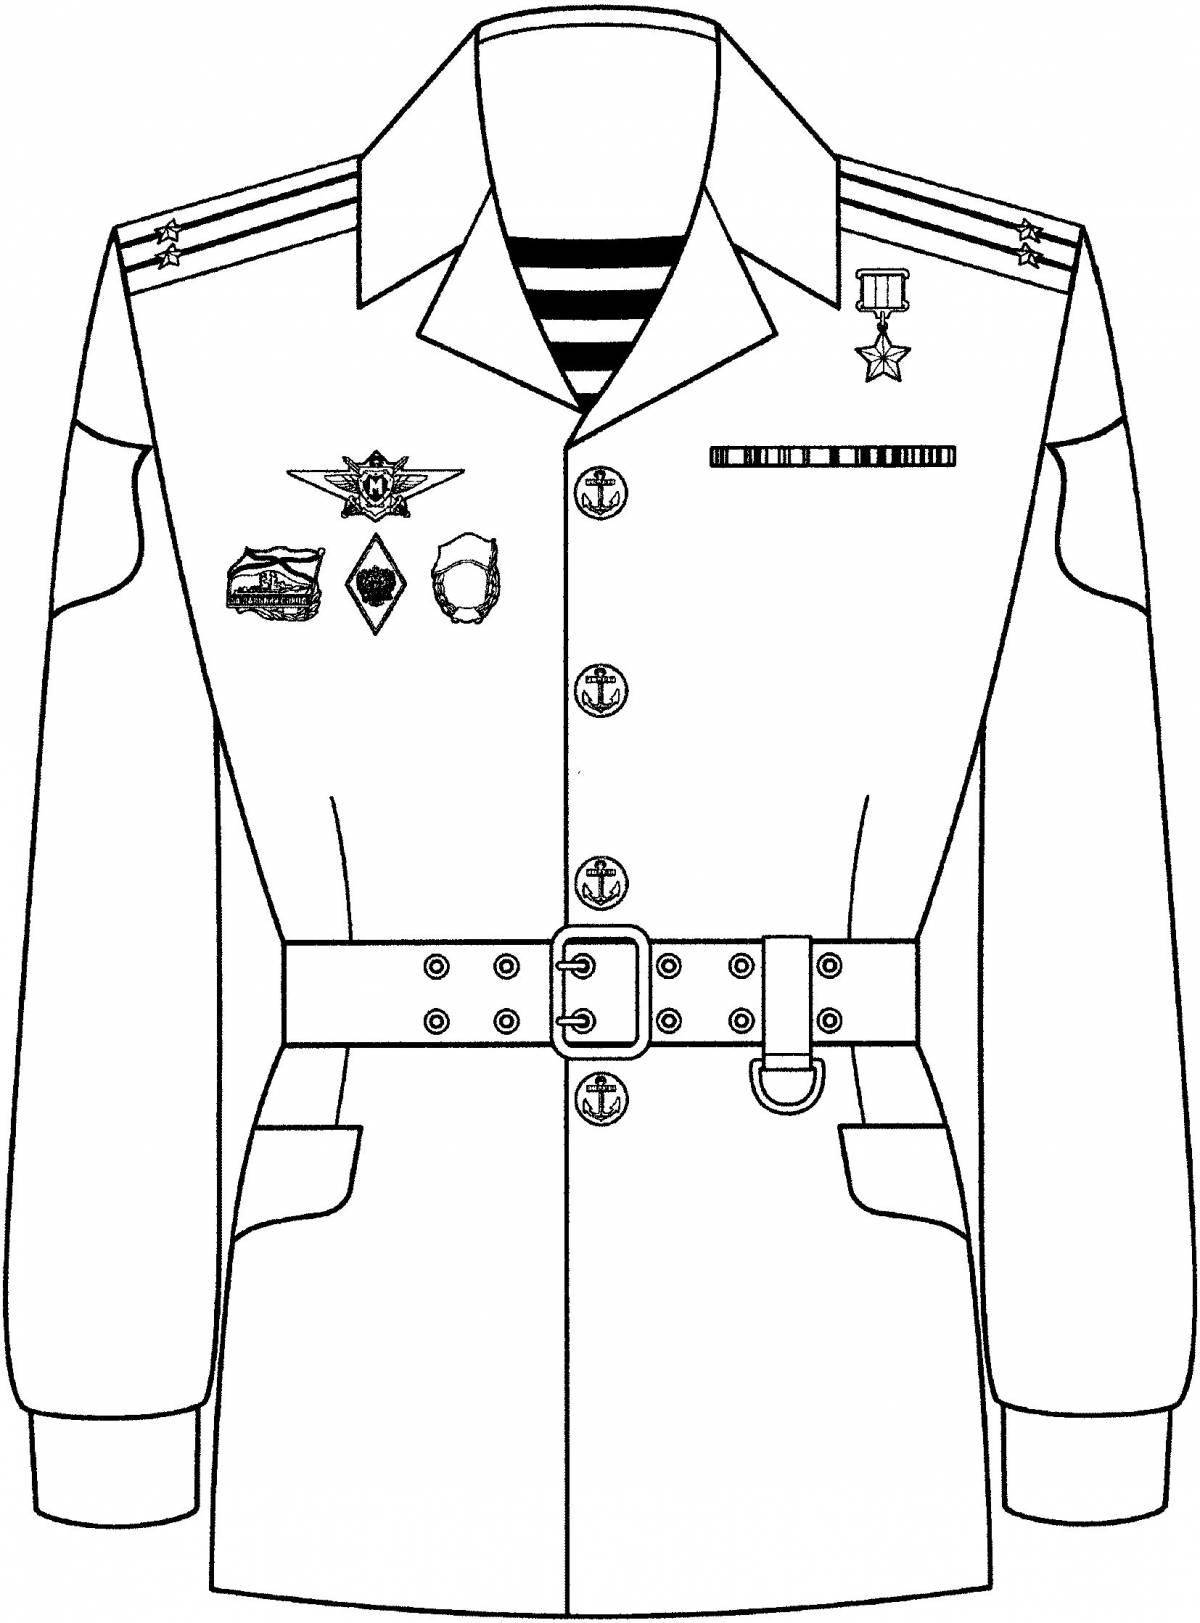 Charming military uniform coloring book